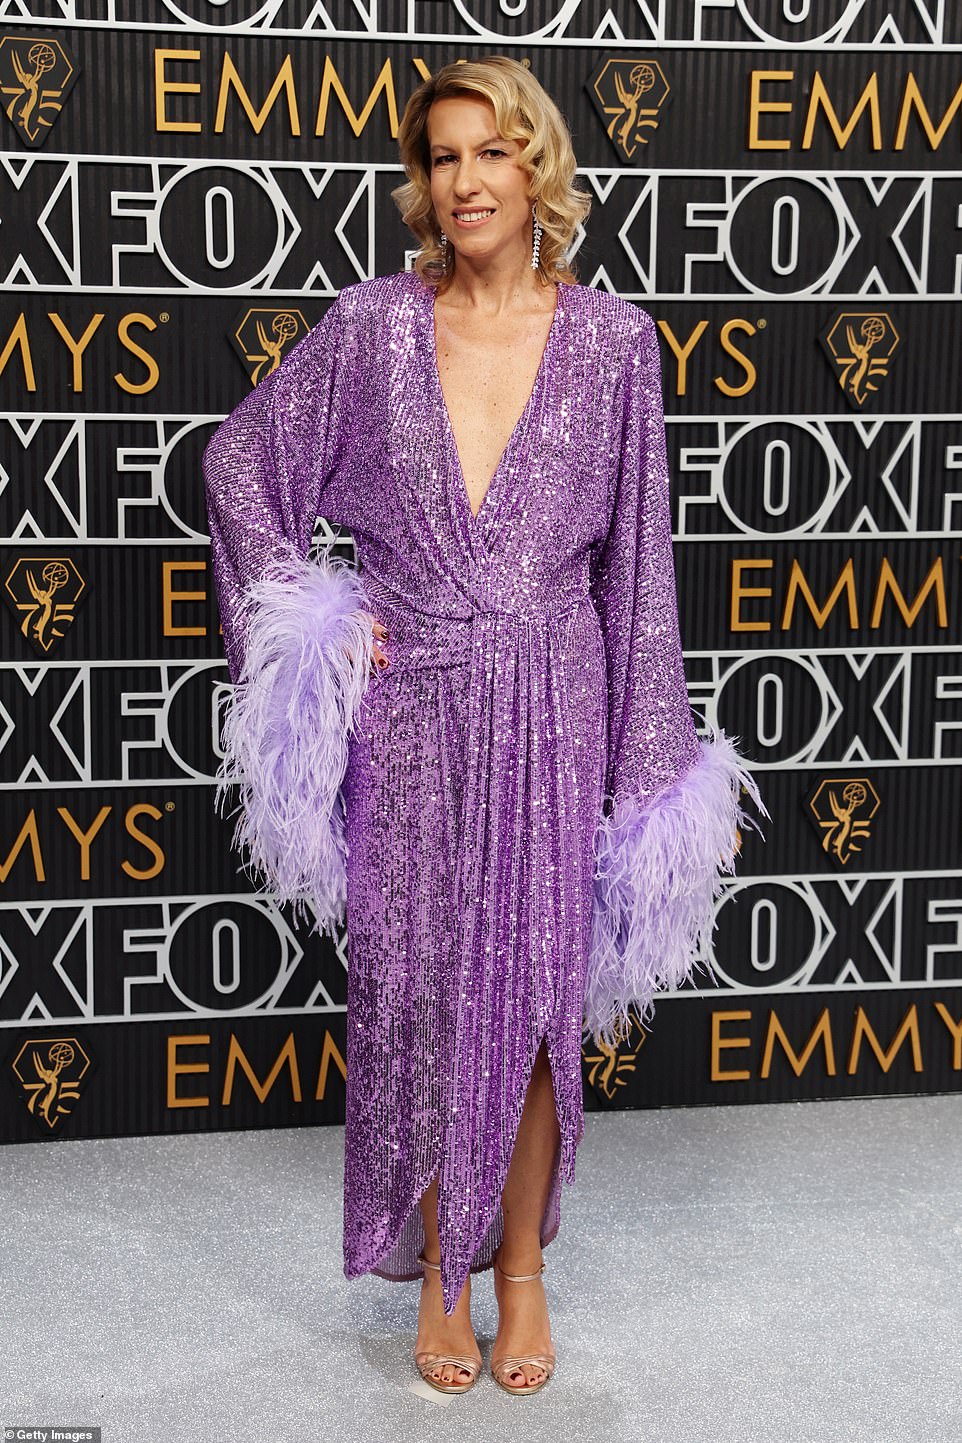 Francesca Zocchi's purple sequin-and-feathered number made her look like a substitute host for a game show - or perhaps a wannabe show girl with her sights set on a Las Vegas stage